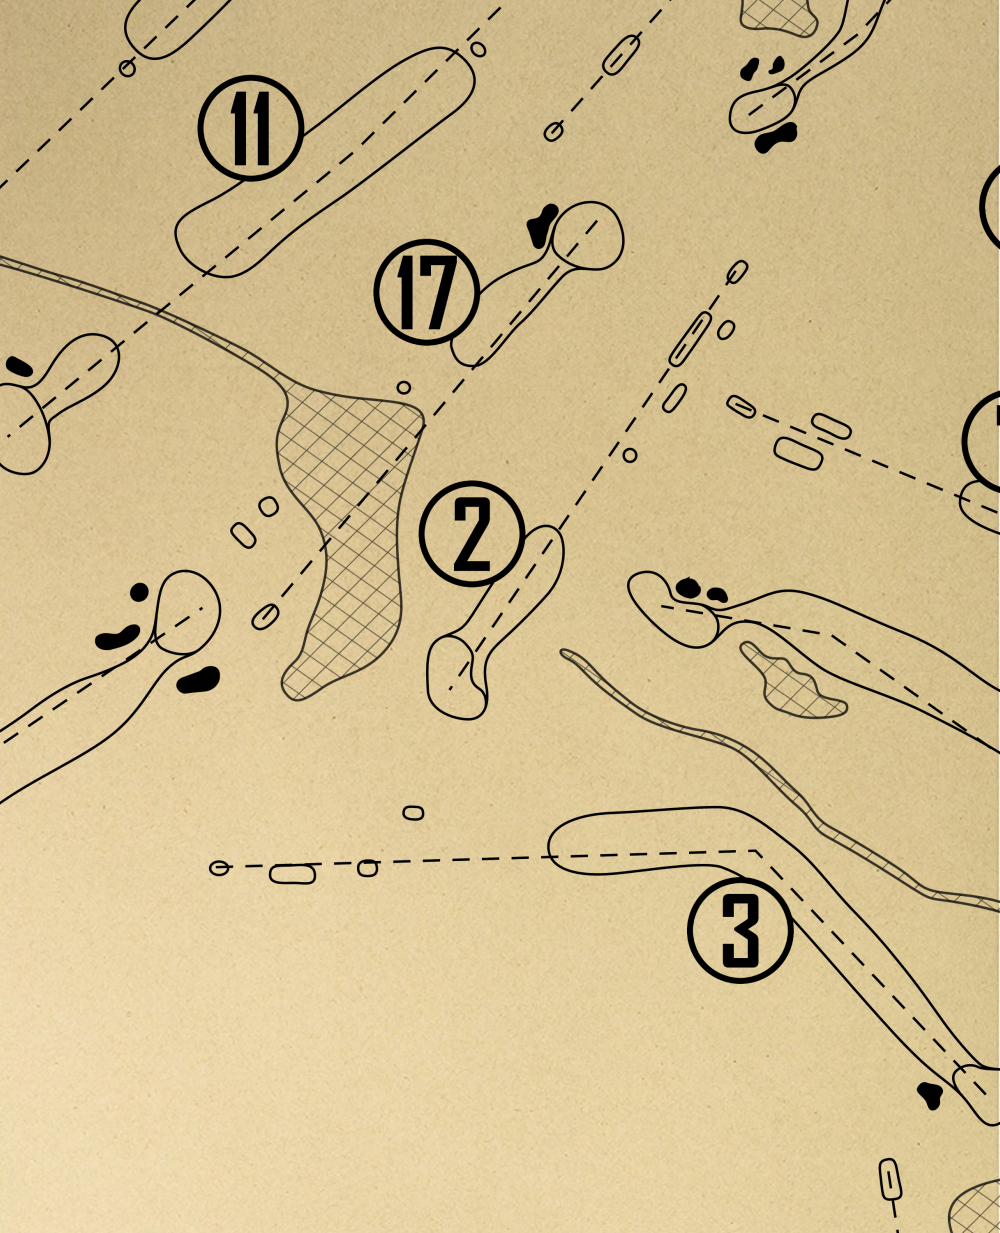 Whidbey Golf Club Outline (Print)